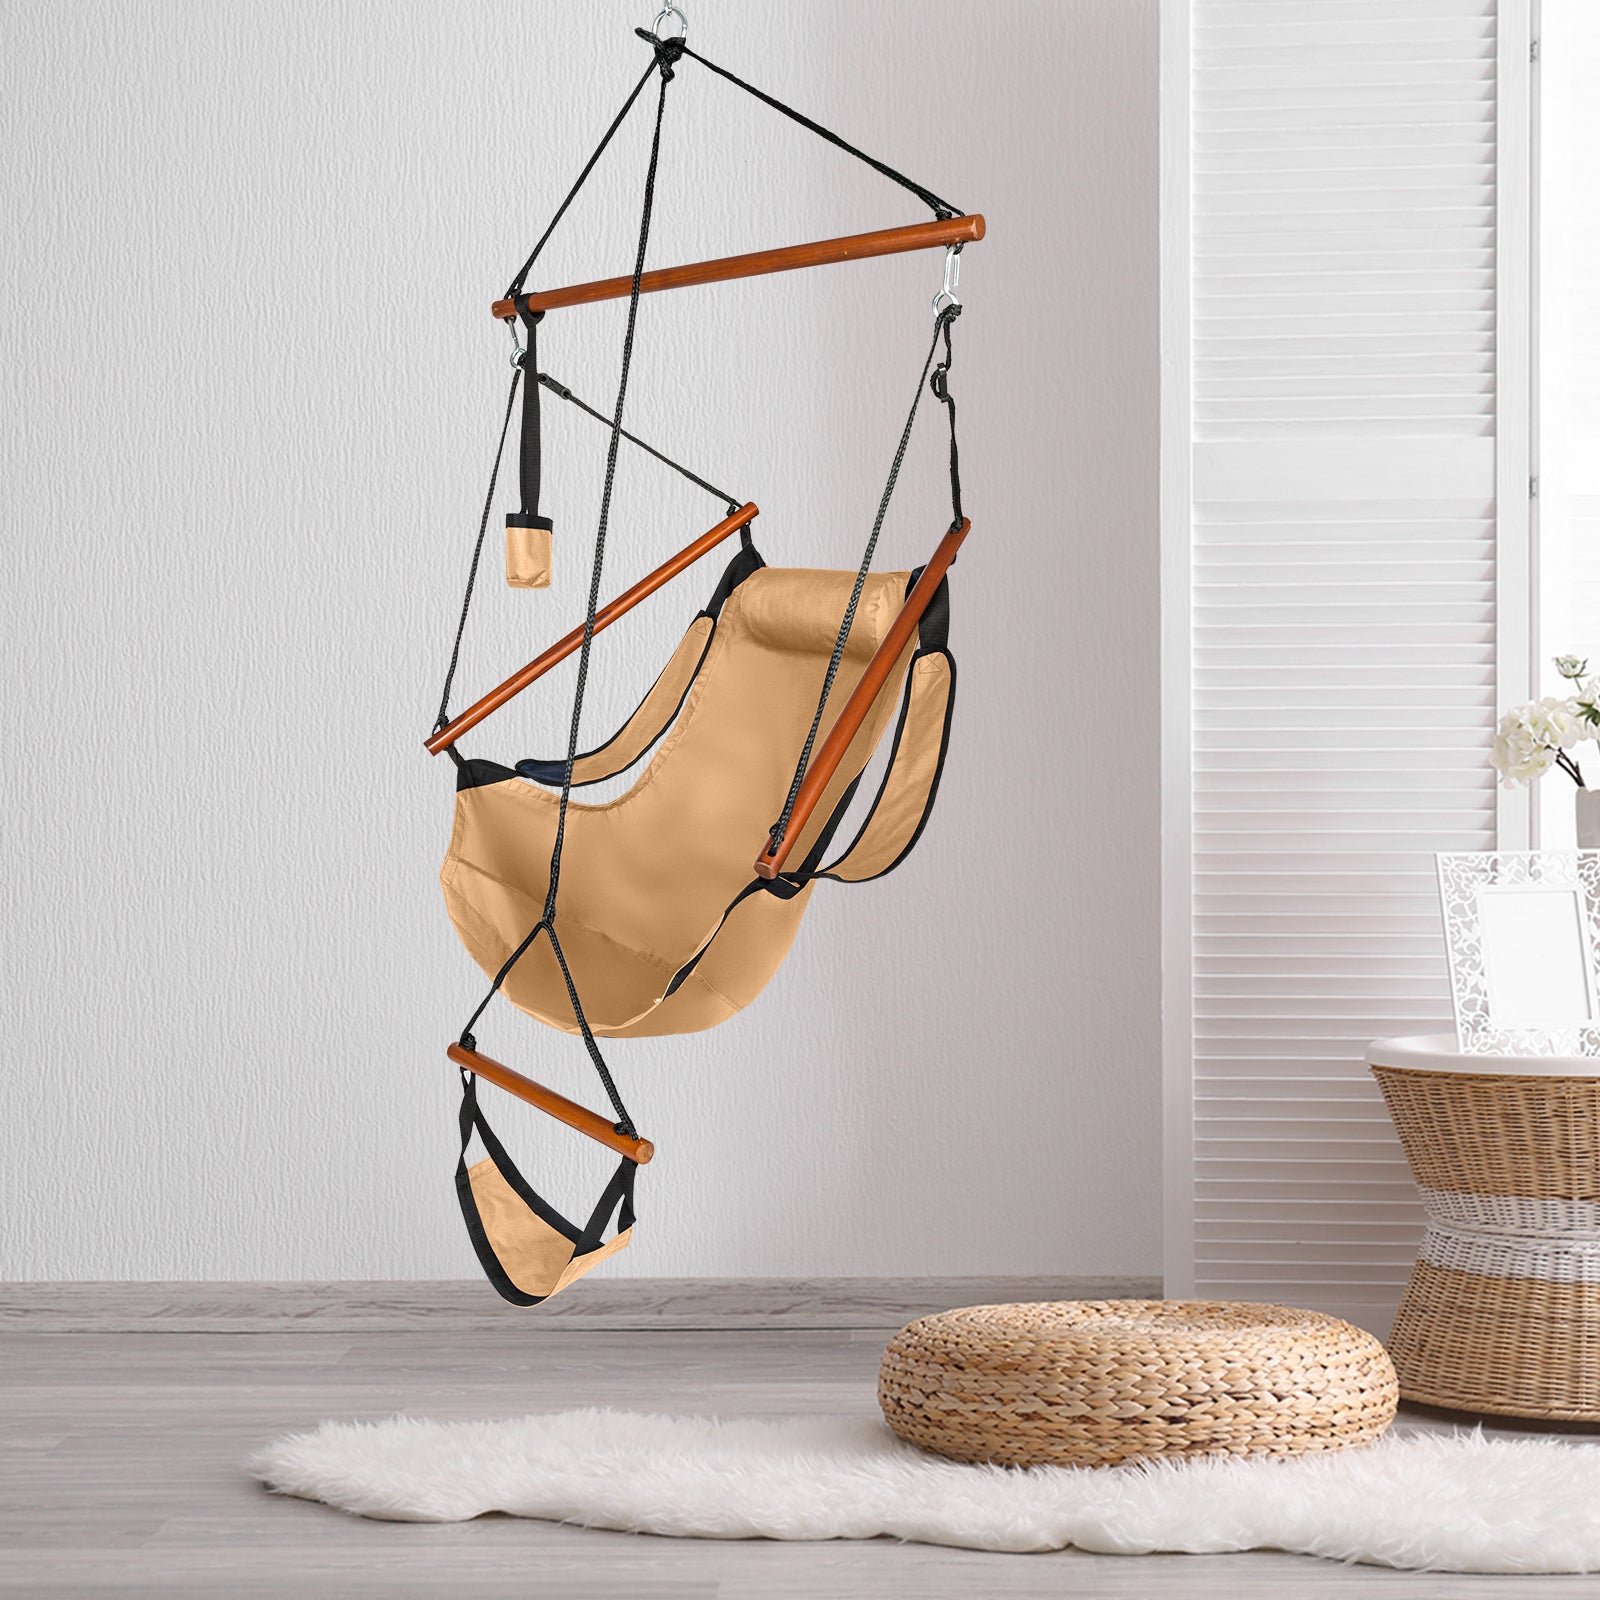 Cloth Hardwood With Cup Holder Wooden Stick Perforated 100kg Seaside Courtyard Oxford Cloth Hanging Chair?? Brown